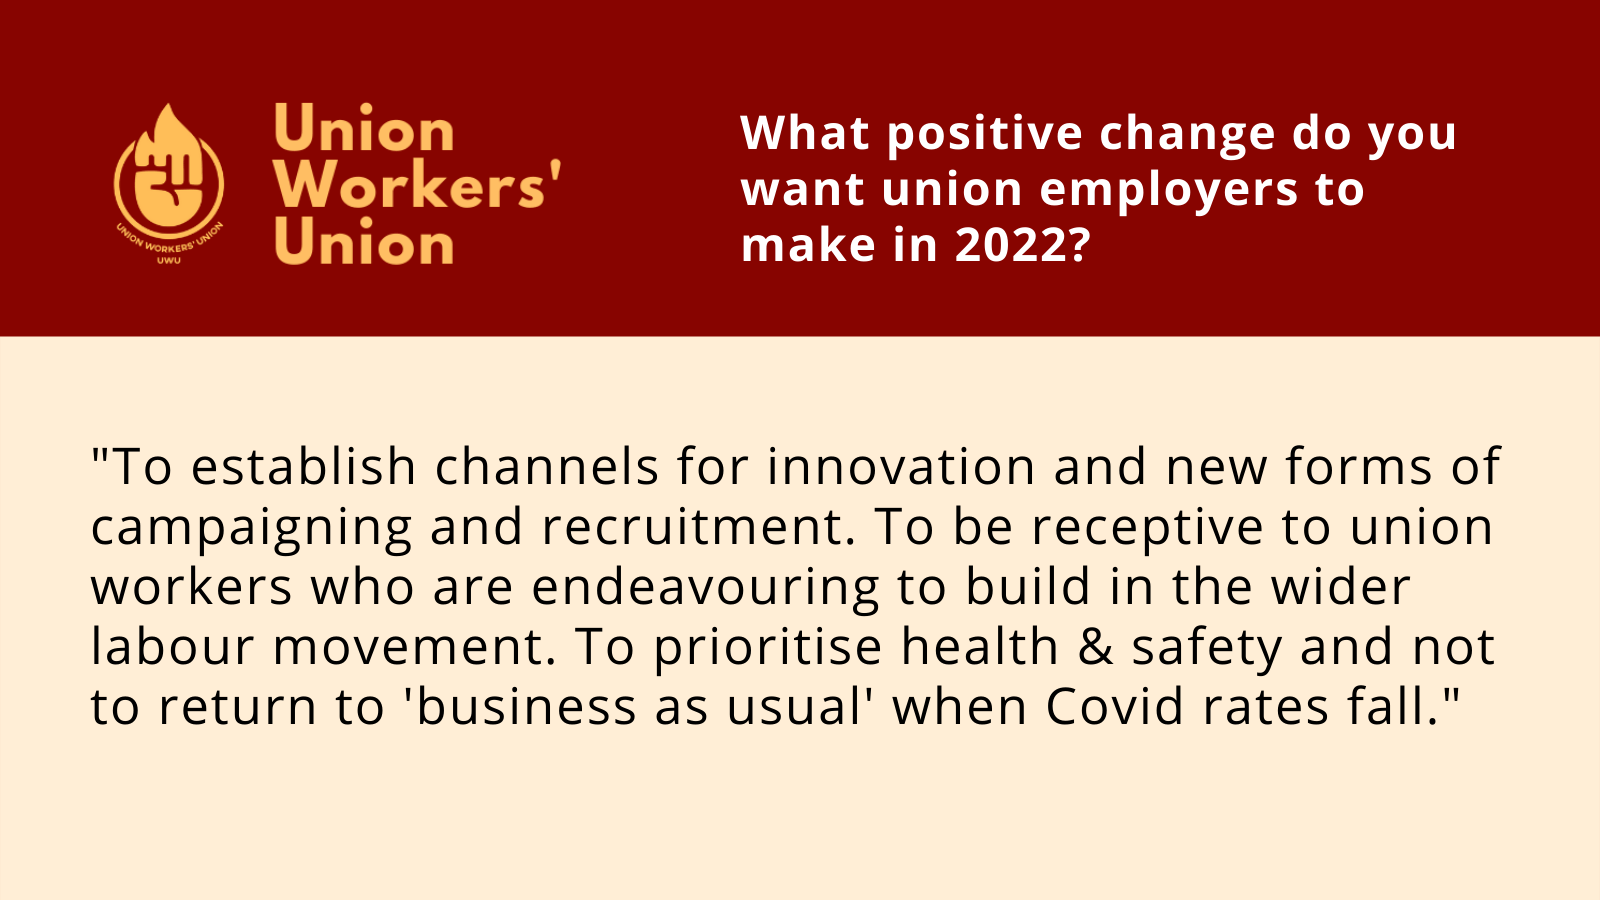 To establish channels for innovation and new forms of campaigning and recruitment. To be receptive to union workers who are endeavouring to build in the wider labour movement. To prioritise health & safety and not to return to "business as usual' when Covid rates fall.